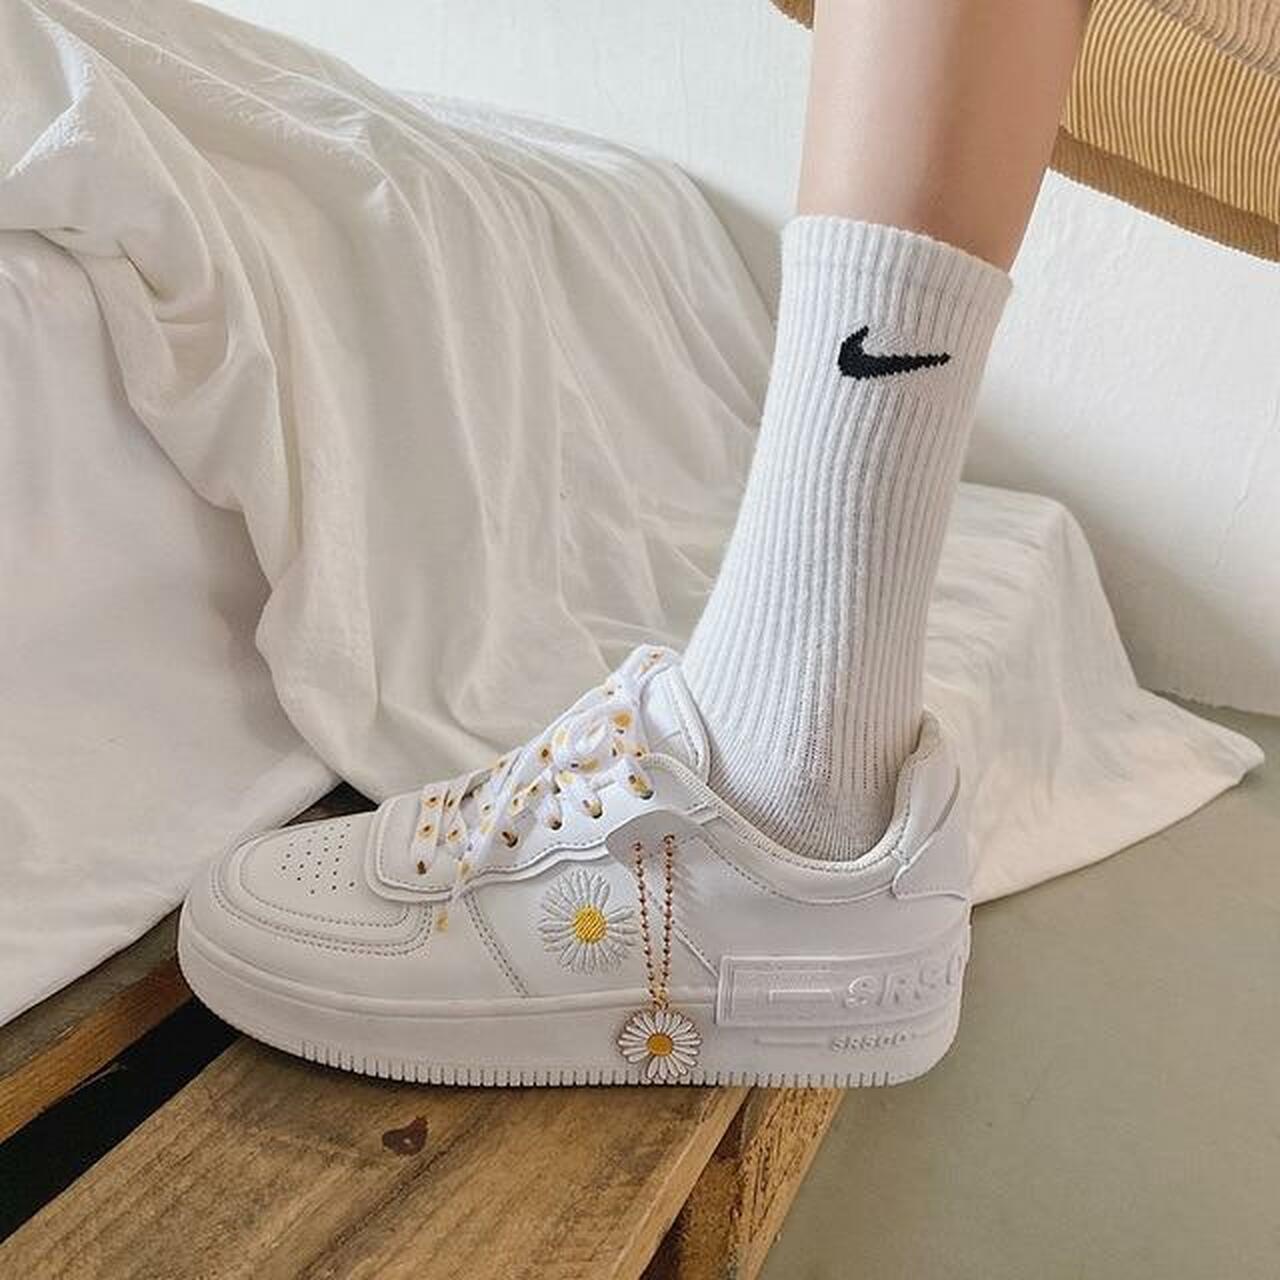 Indie aesthetic customized daisy sneakers